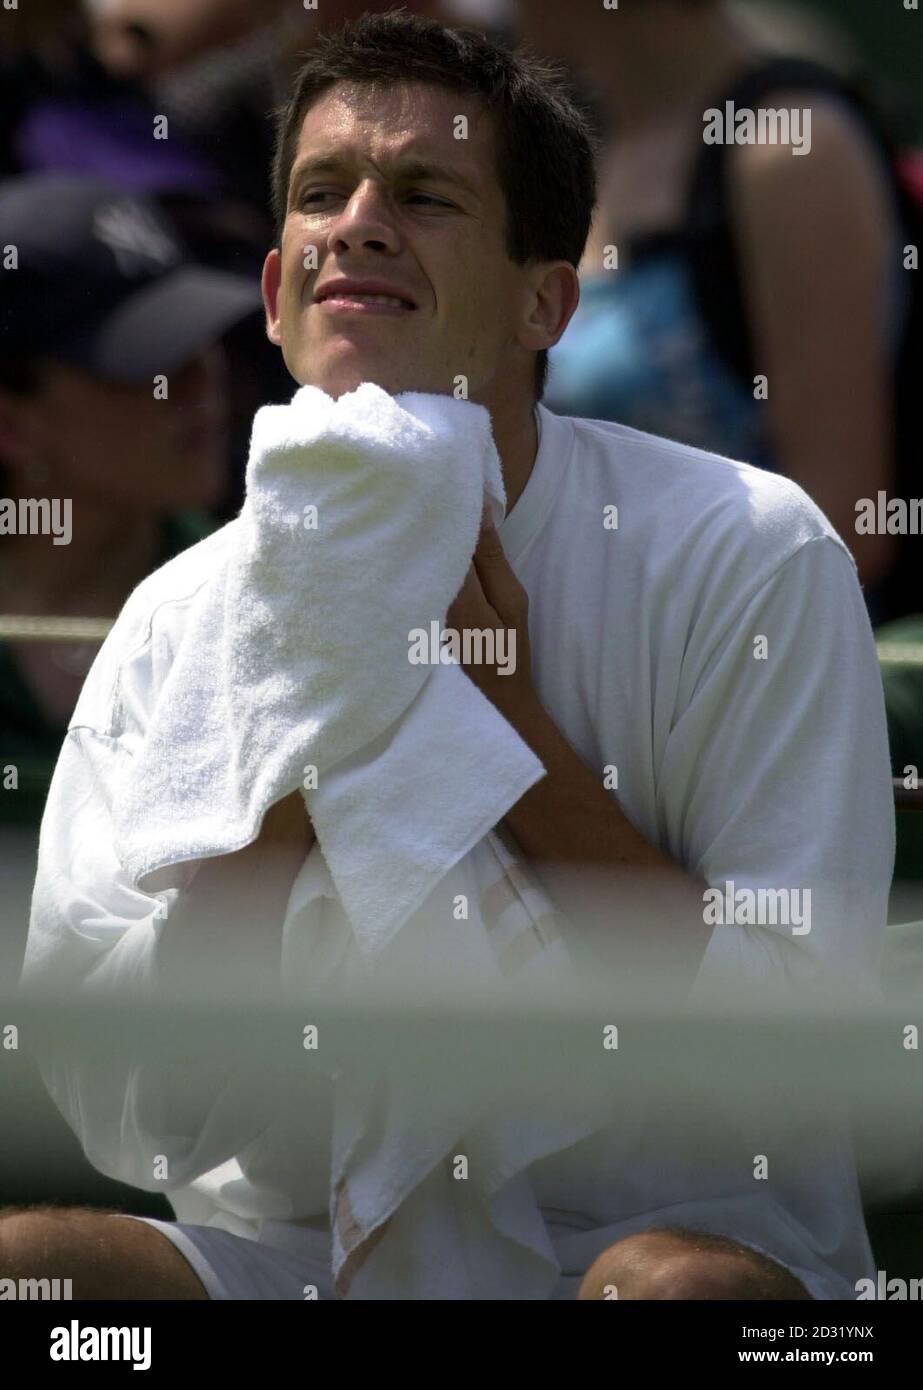 NO COMMERCIAL USE: British tennis star Tim Henman takes a break during a practice session before his match against America's Todd Martin  at Wimbledon, London. Stock Photo